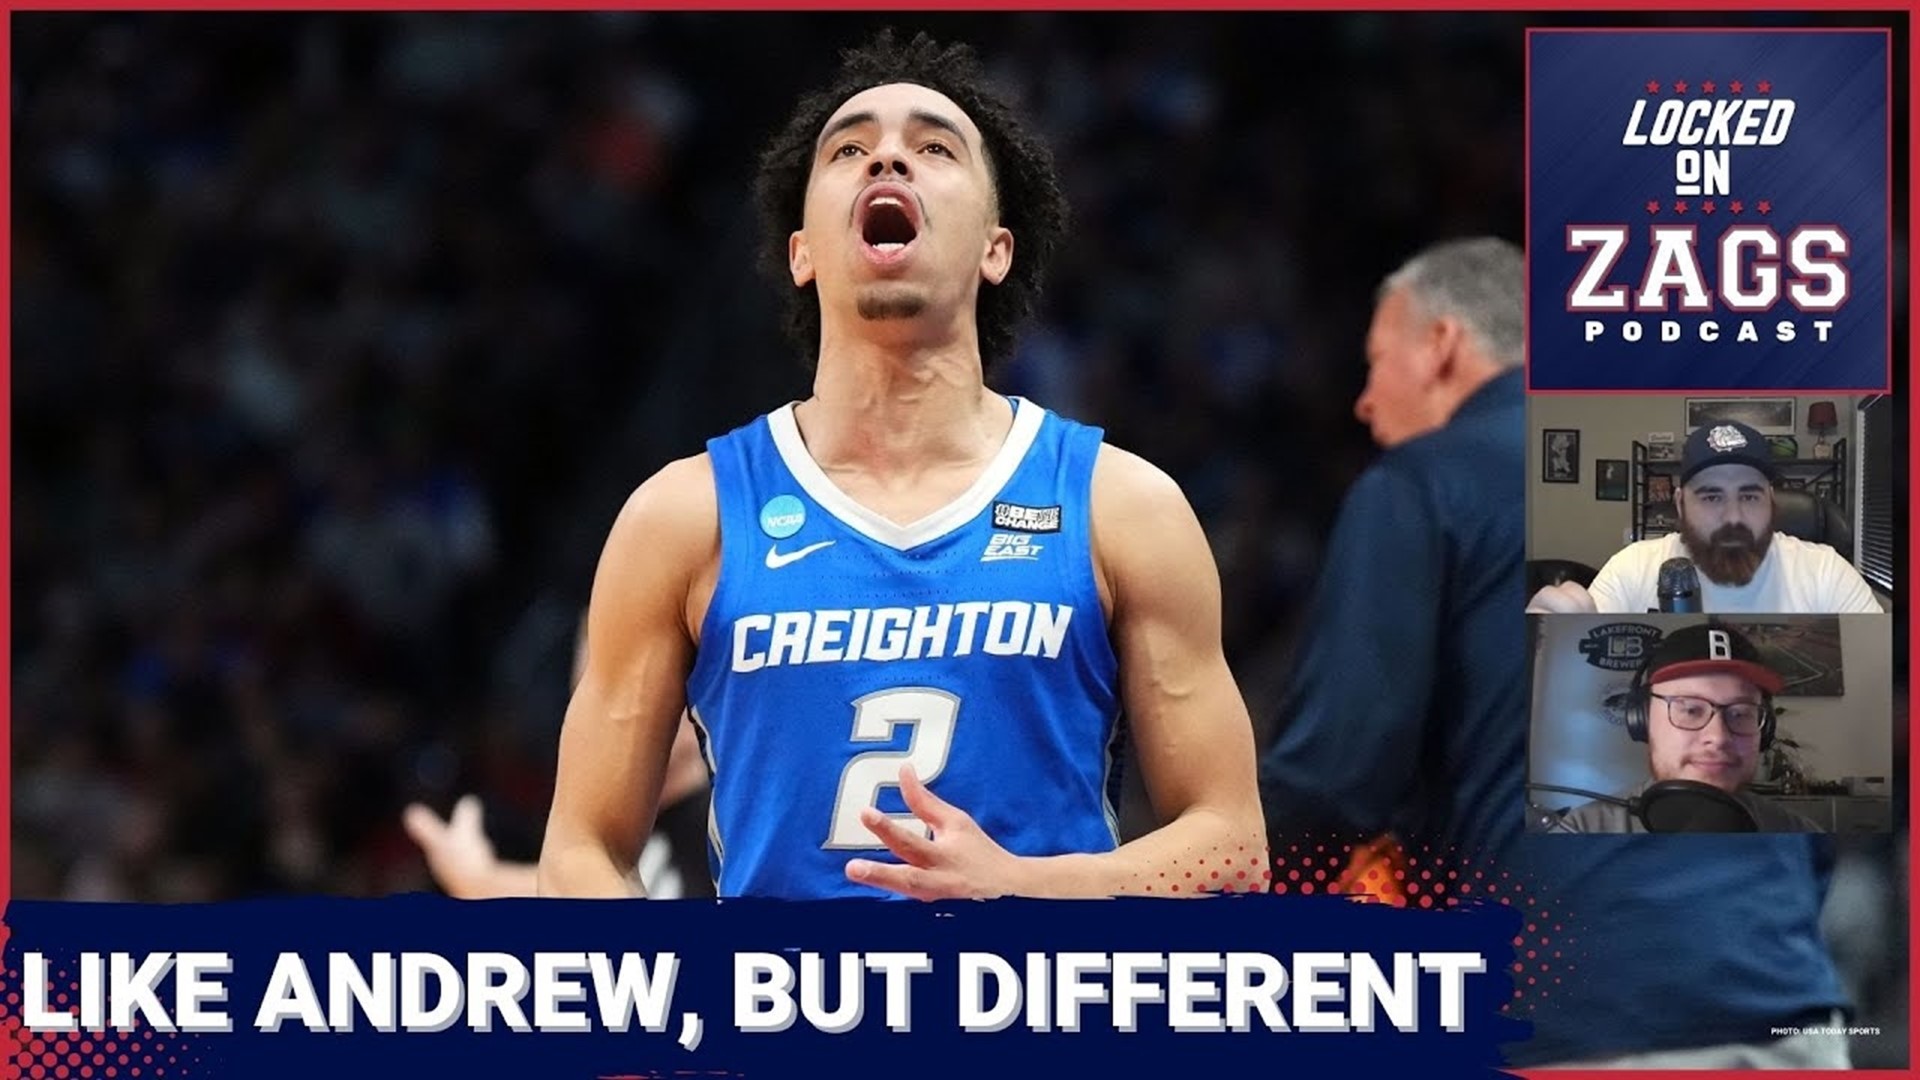 Gonzaga Bulldogs guard Ryan Nembhard is not the same as his brother, Andrew, and we look at the similarities and differences.